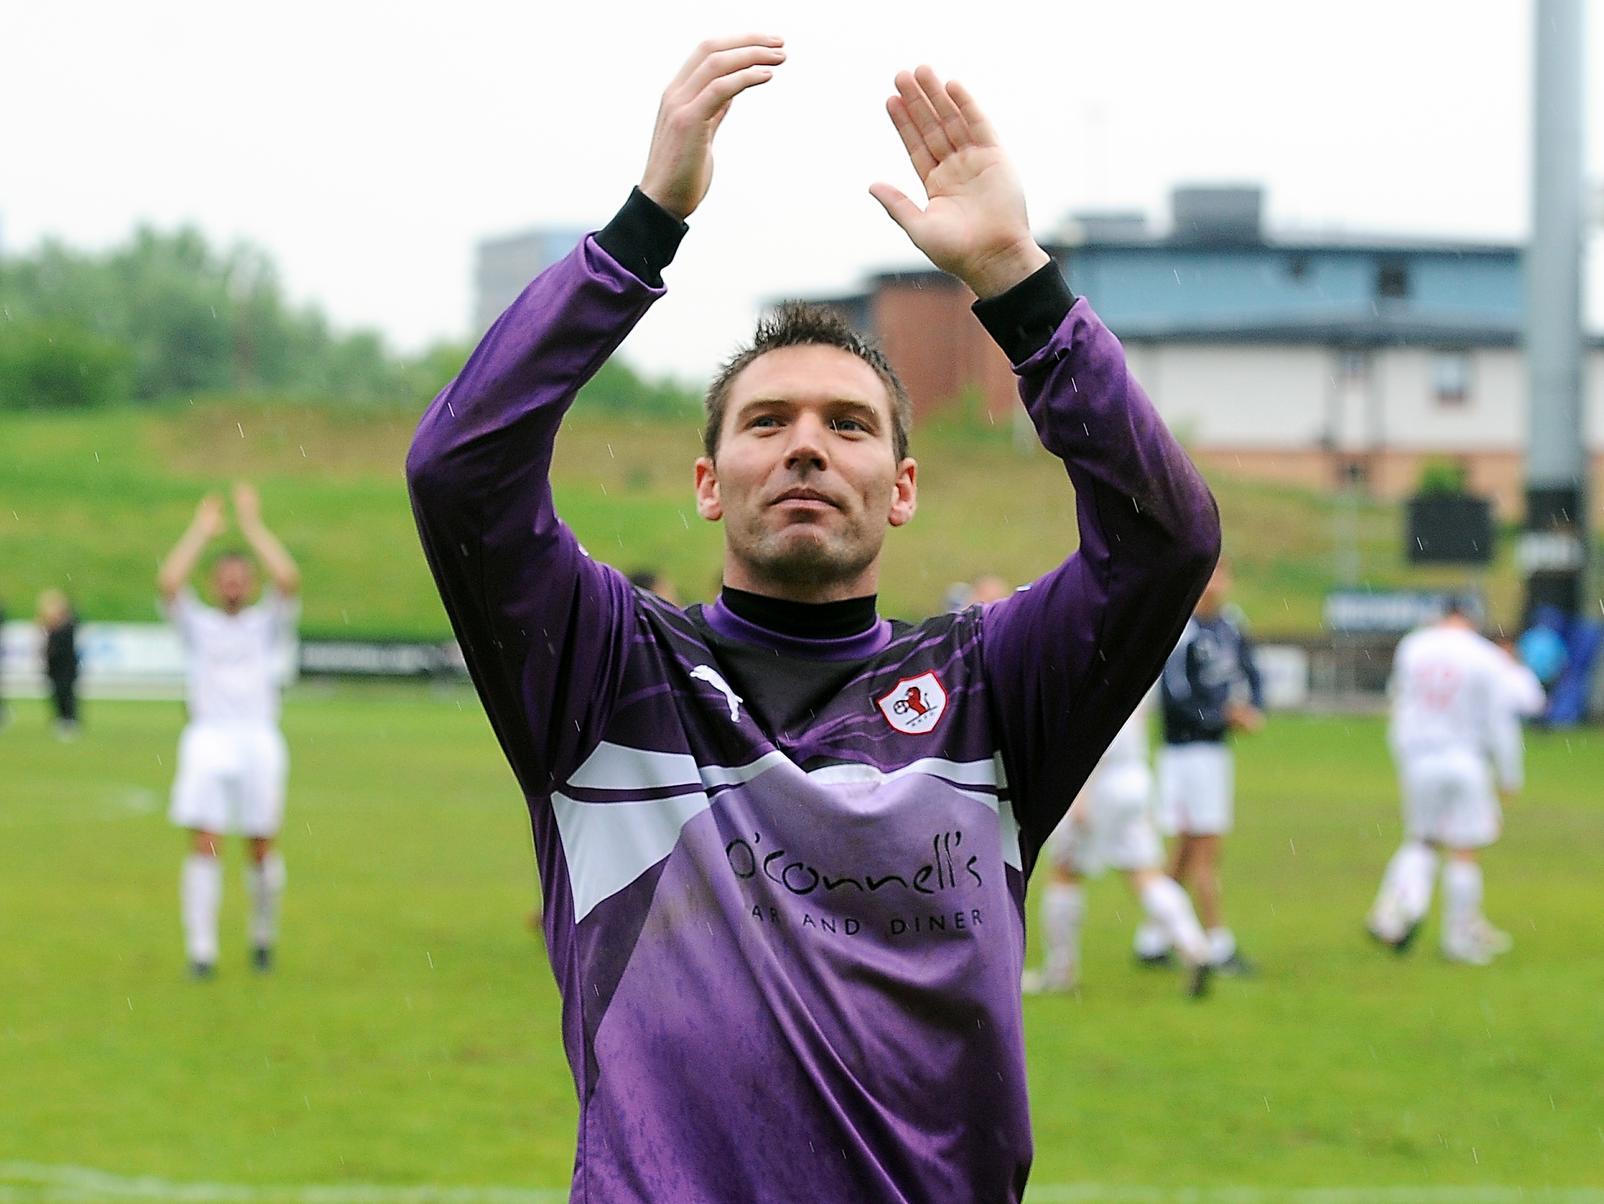 Now in his second spell at the club, Davie received a testimonial in 2018 for services during his 8-year first spell, where his performances belied his part-time status. His triple save against Ayr in March 2010 was world class.